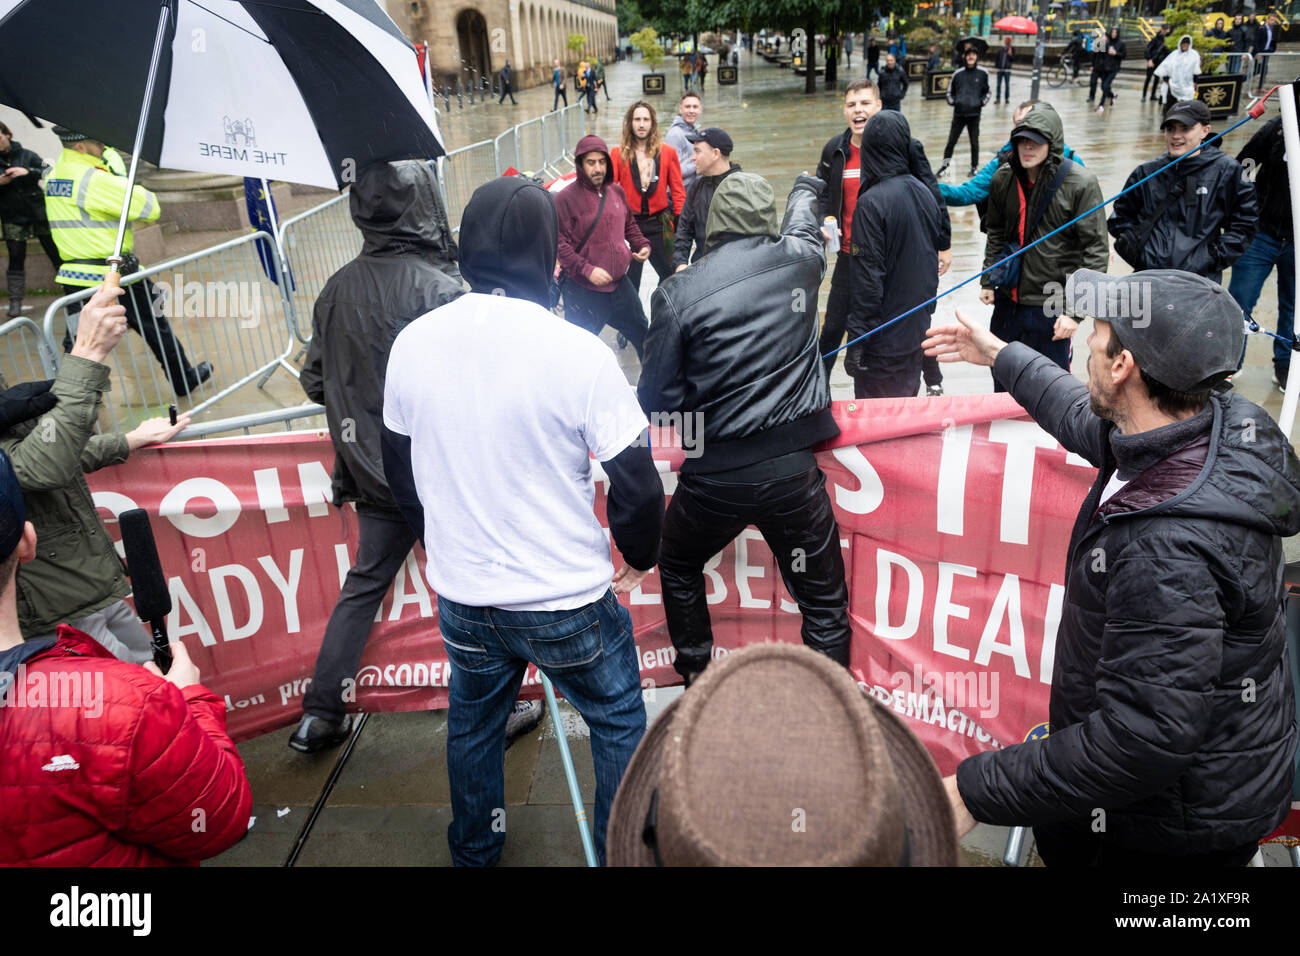 Manchester, UK. 29 September, 2019. Pro-Brexit demonstrators clashed with anti-fashists outside the Conservative Party Conference. Andy Barton/Alamy Live News Stock Photo